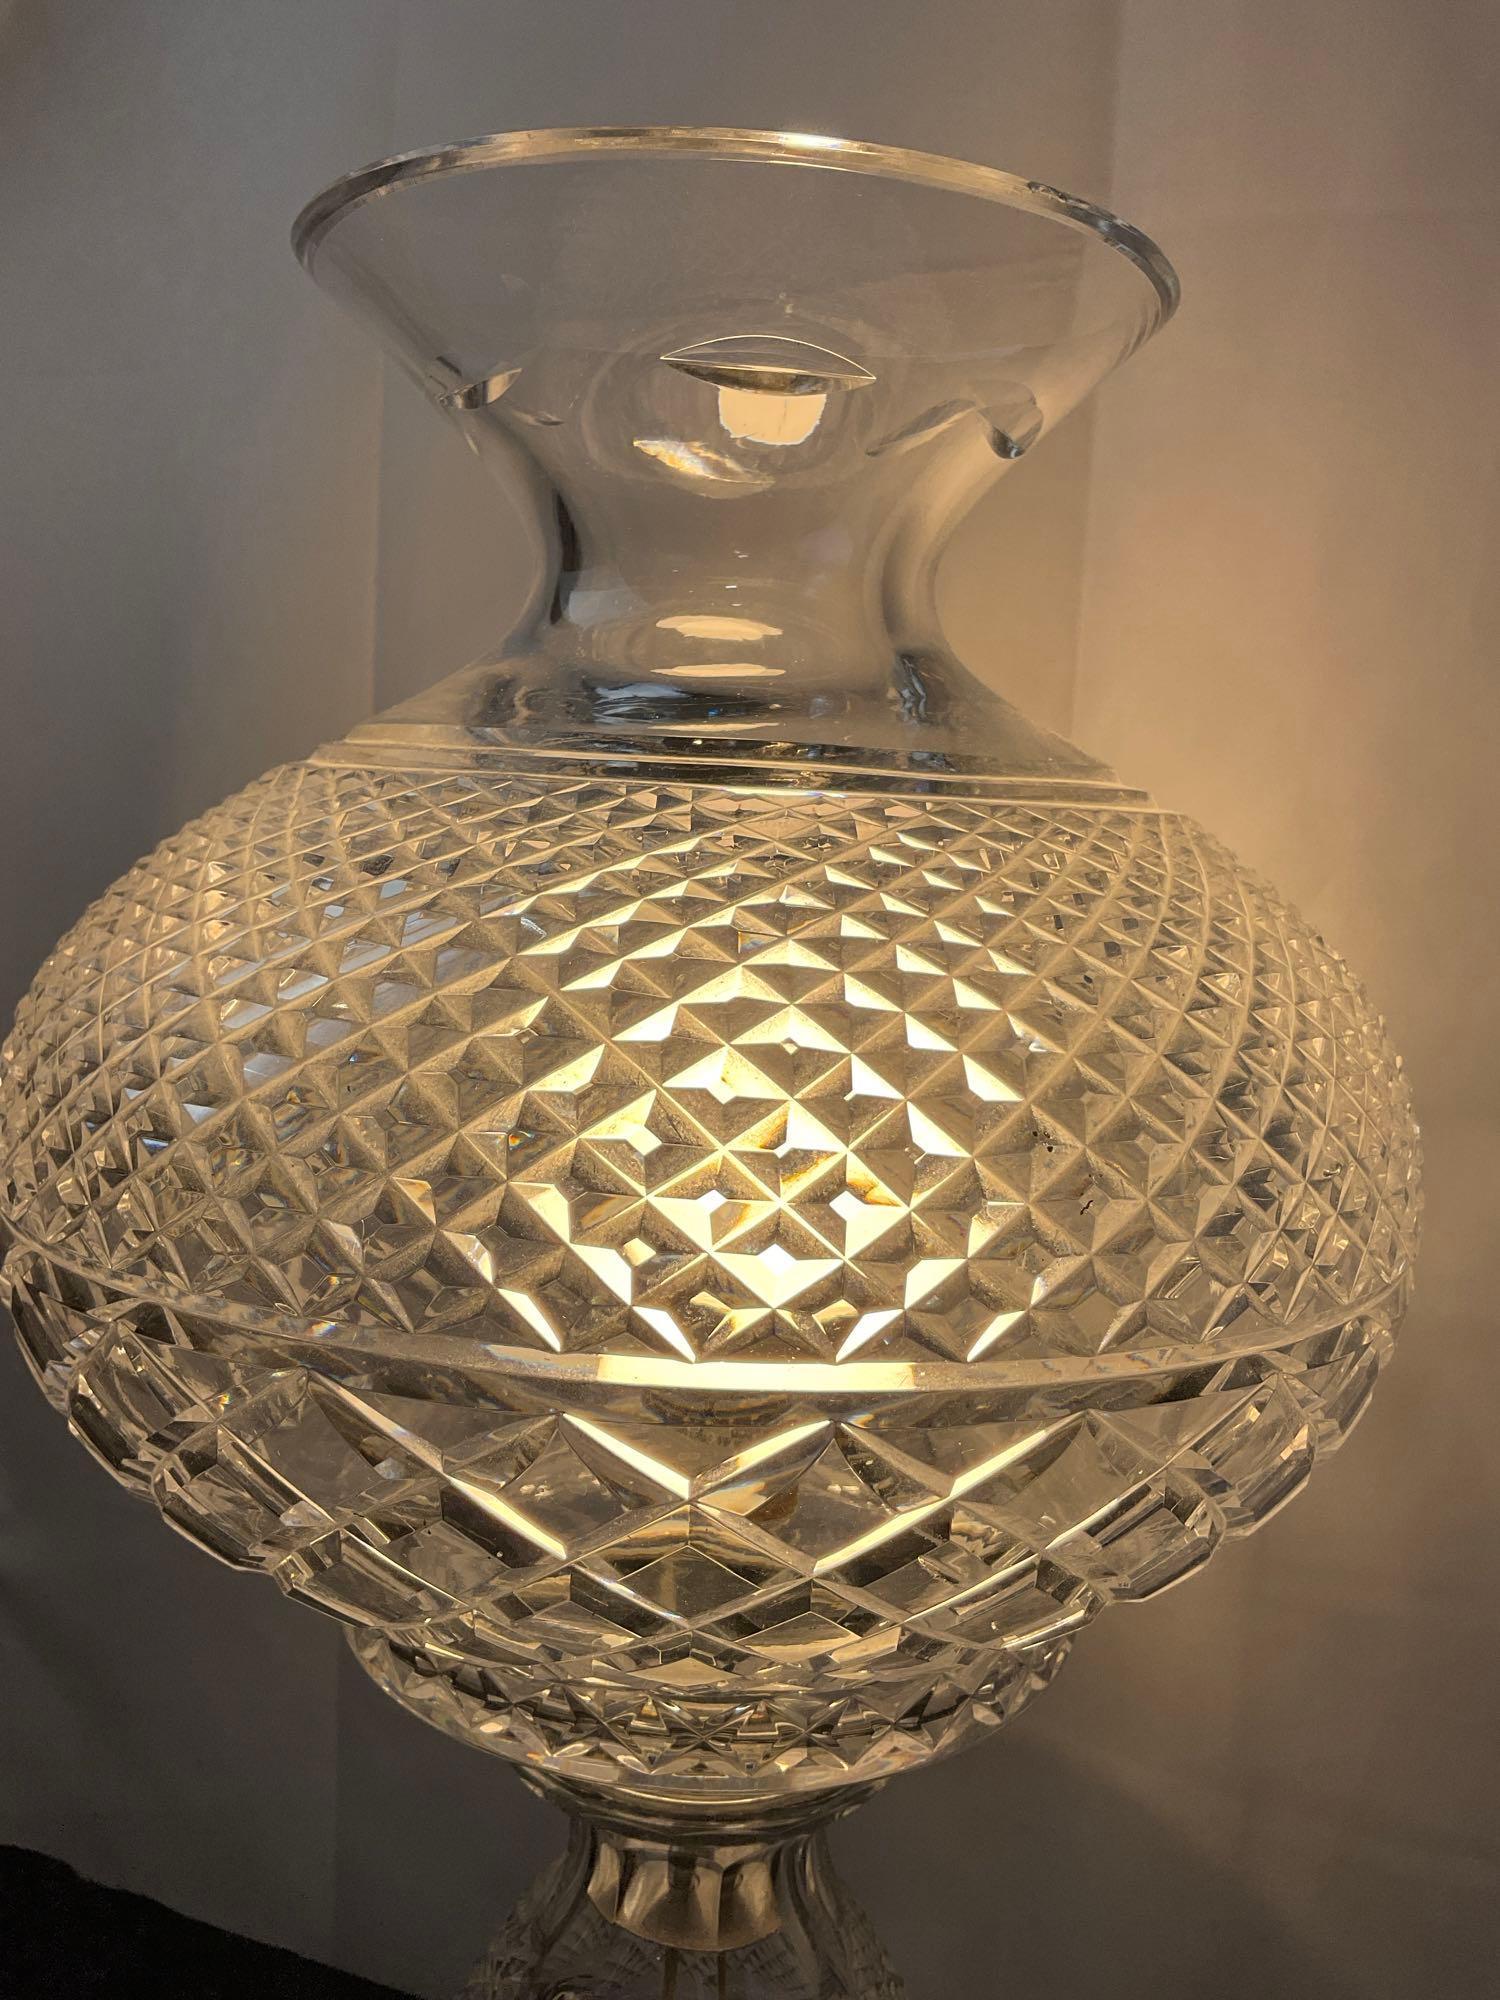 Unique Waterford Crystal Hurricane Lamp, tested and working